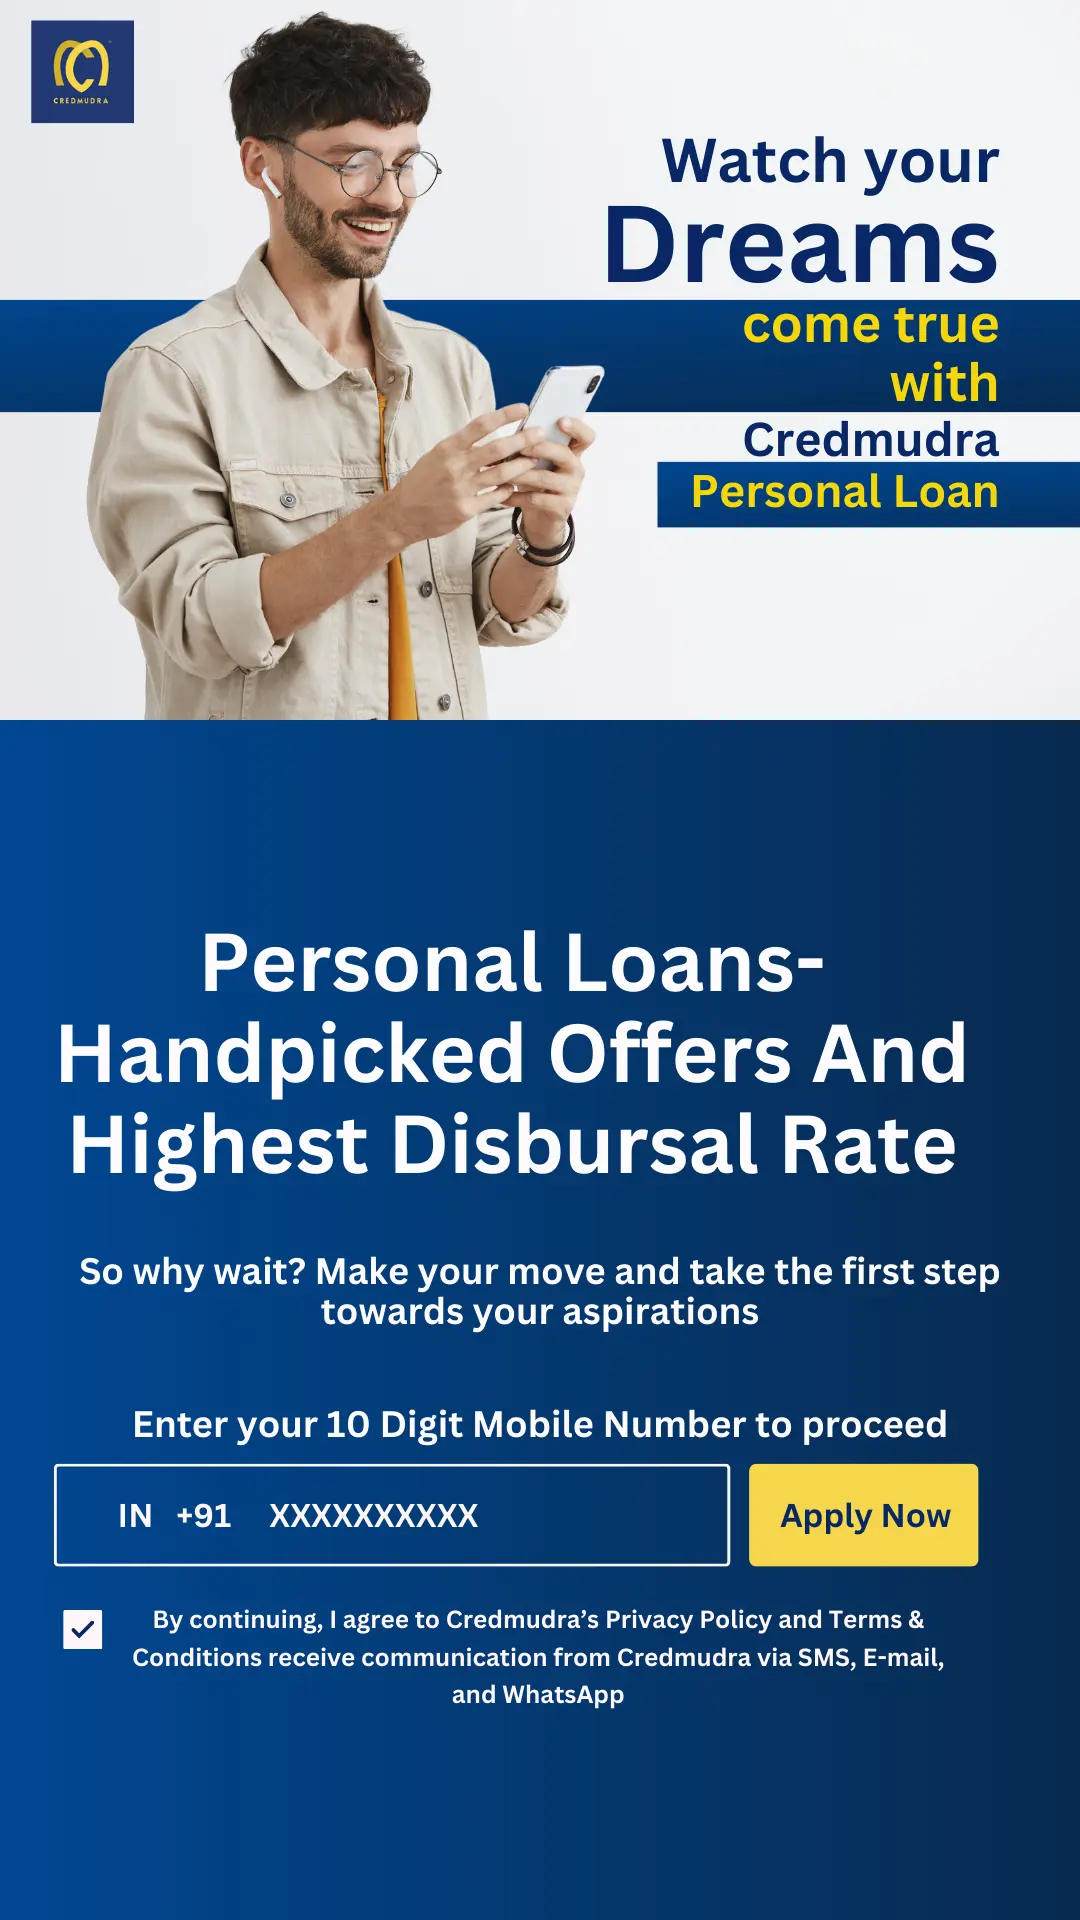 Credmudra popup for mobile